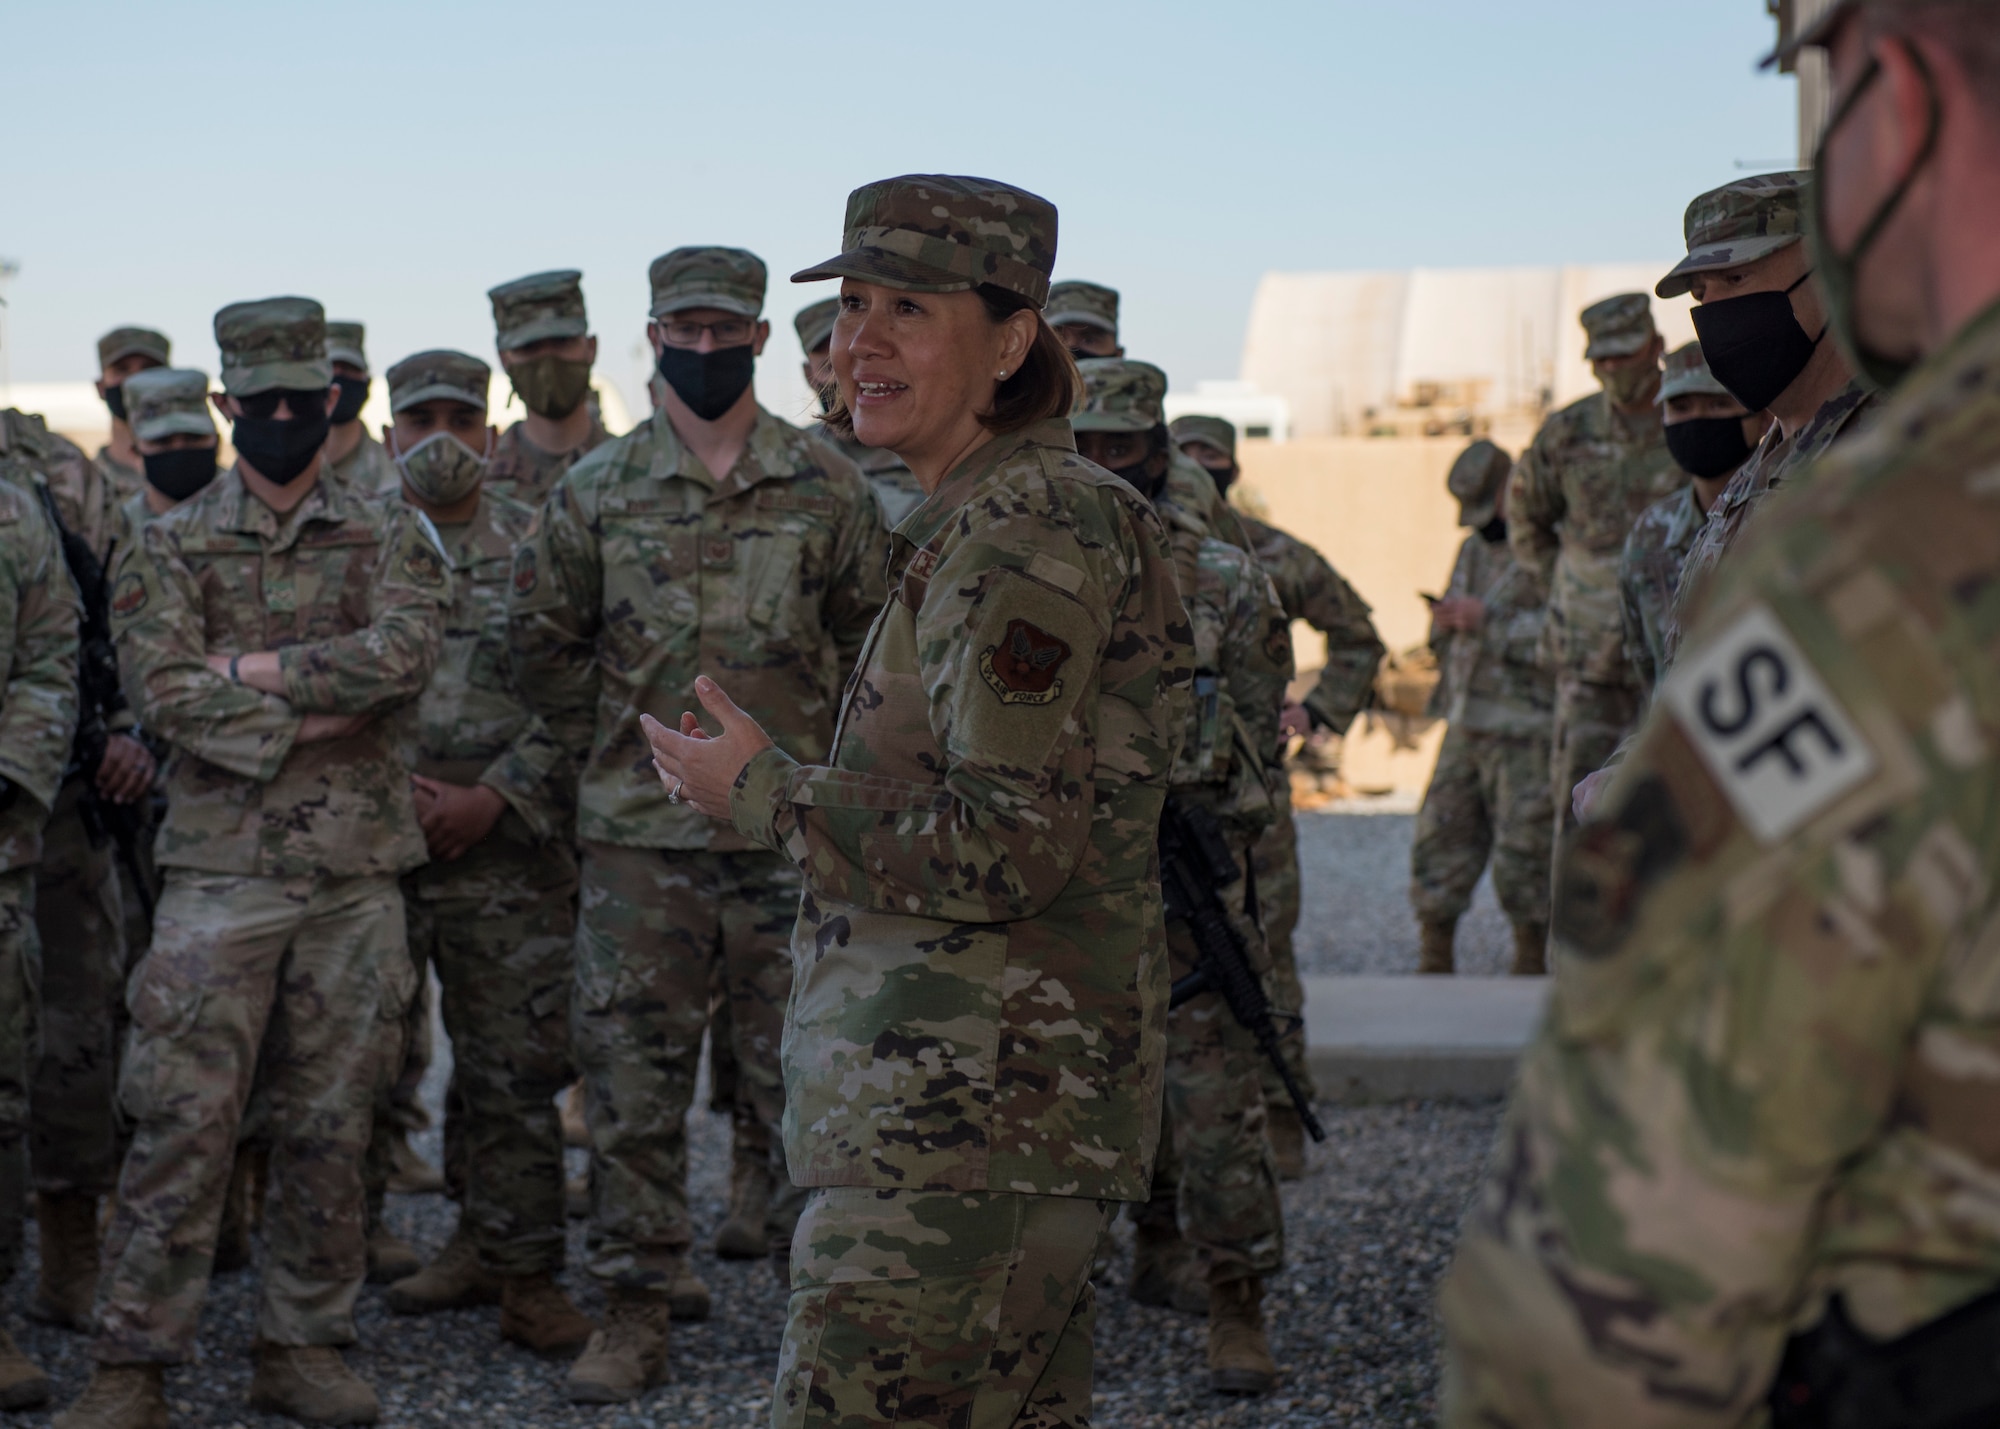 Chief Master Sergeant of the Air Force JoAnne S. Bass speaks to U.S. Air Force Airmen assigned to the 386th Expeditionary Security Forces Squadron at Ali Al Salem Air Base, Kuwait, Dec. 22, 2020. Senior leaders toured ASAB during a series of overseas visits to thank Air and Space Force personnel for their service to the nation. (U.S. Air Force photo by Senior Airman Monica Roybal)